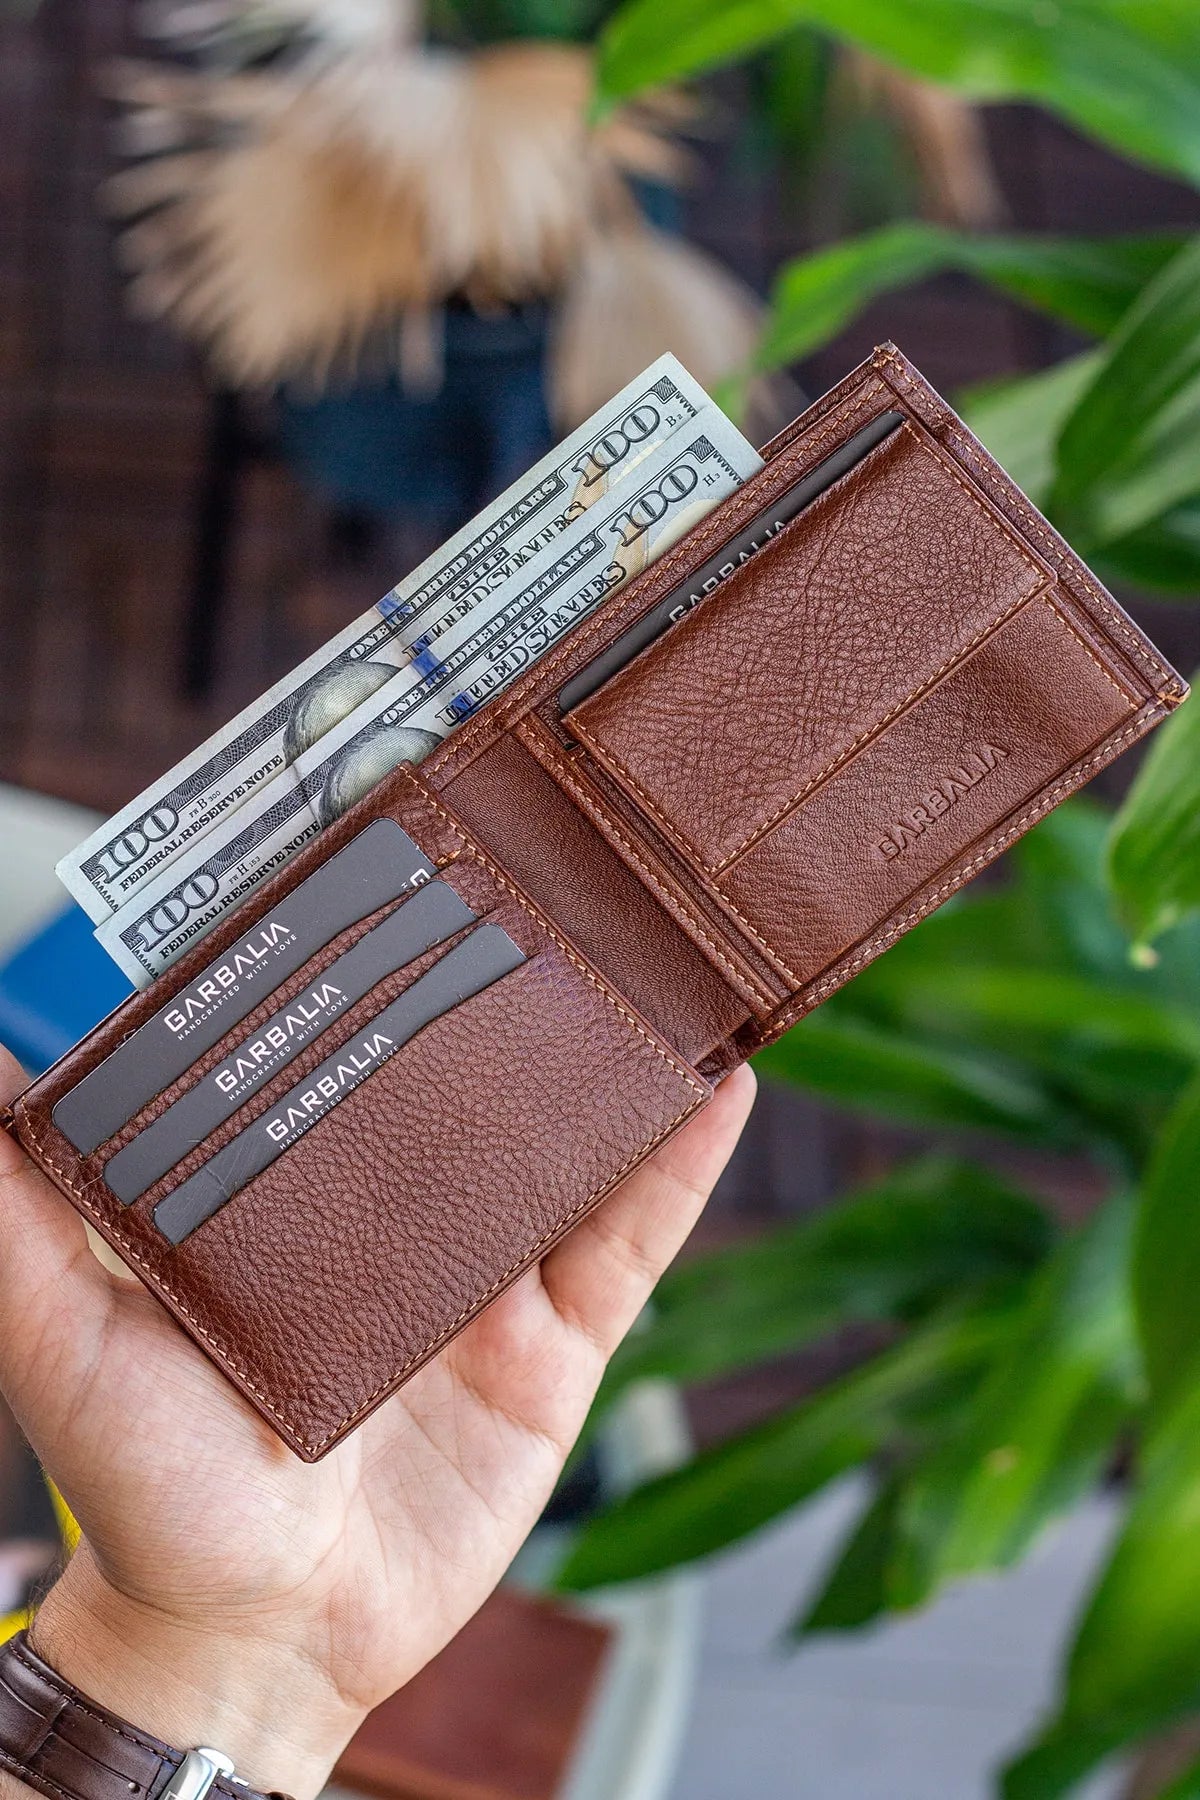 Jackson Genuine Leather RFID Blocking Naturel Tan Wallet with Coin Compartment for Men: A Stylish and Secure Choice